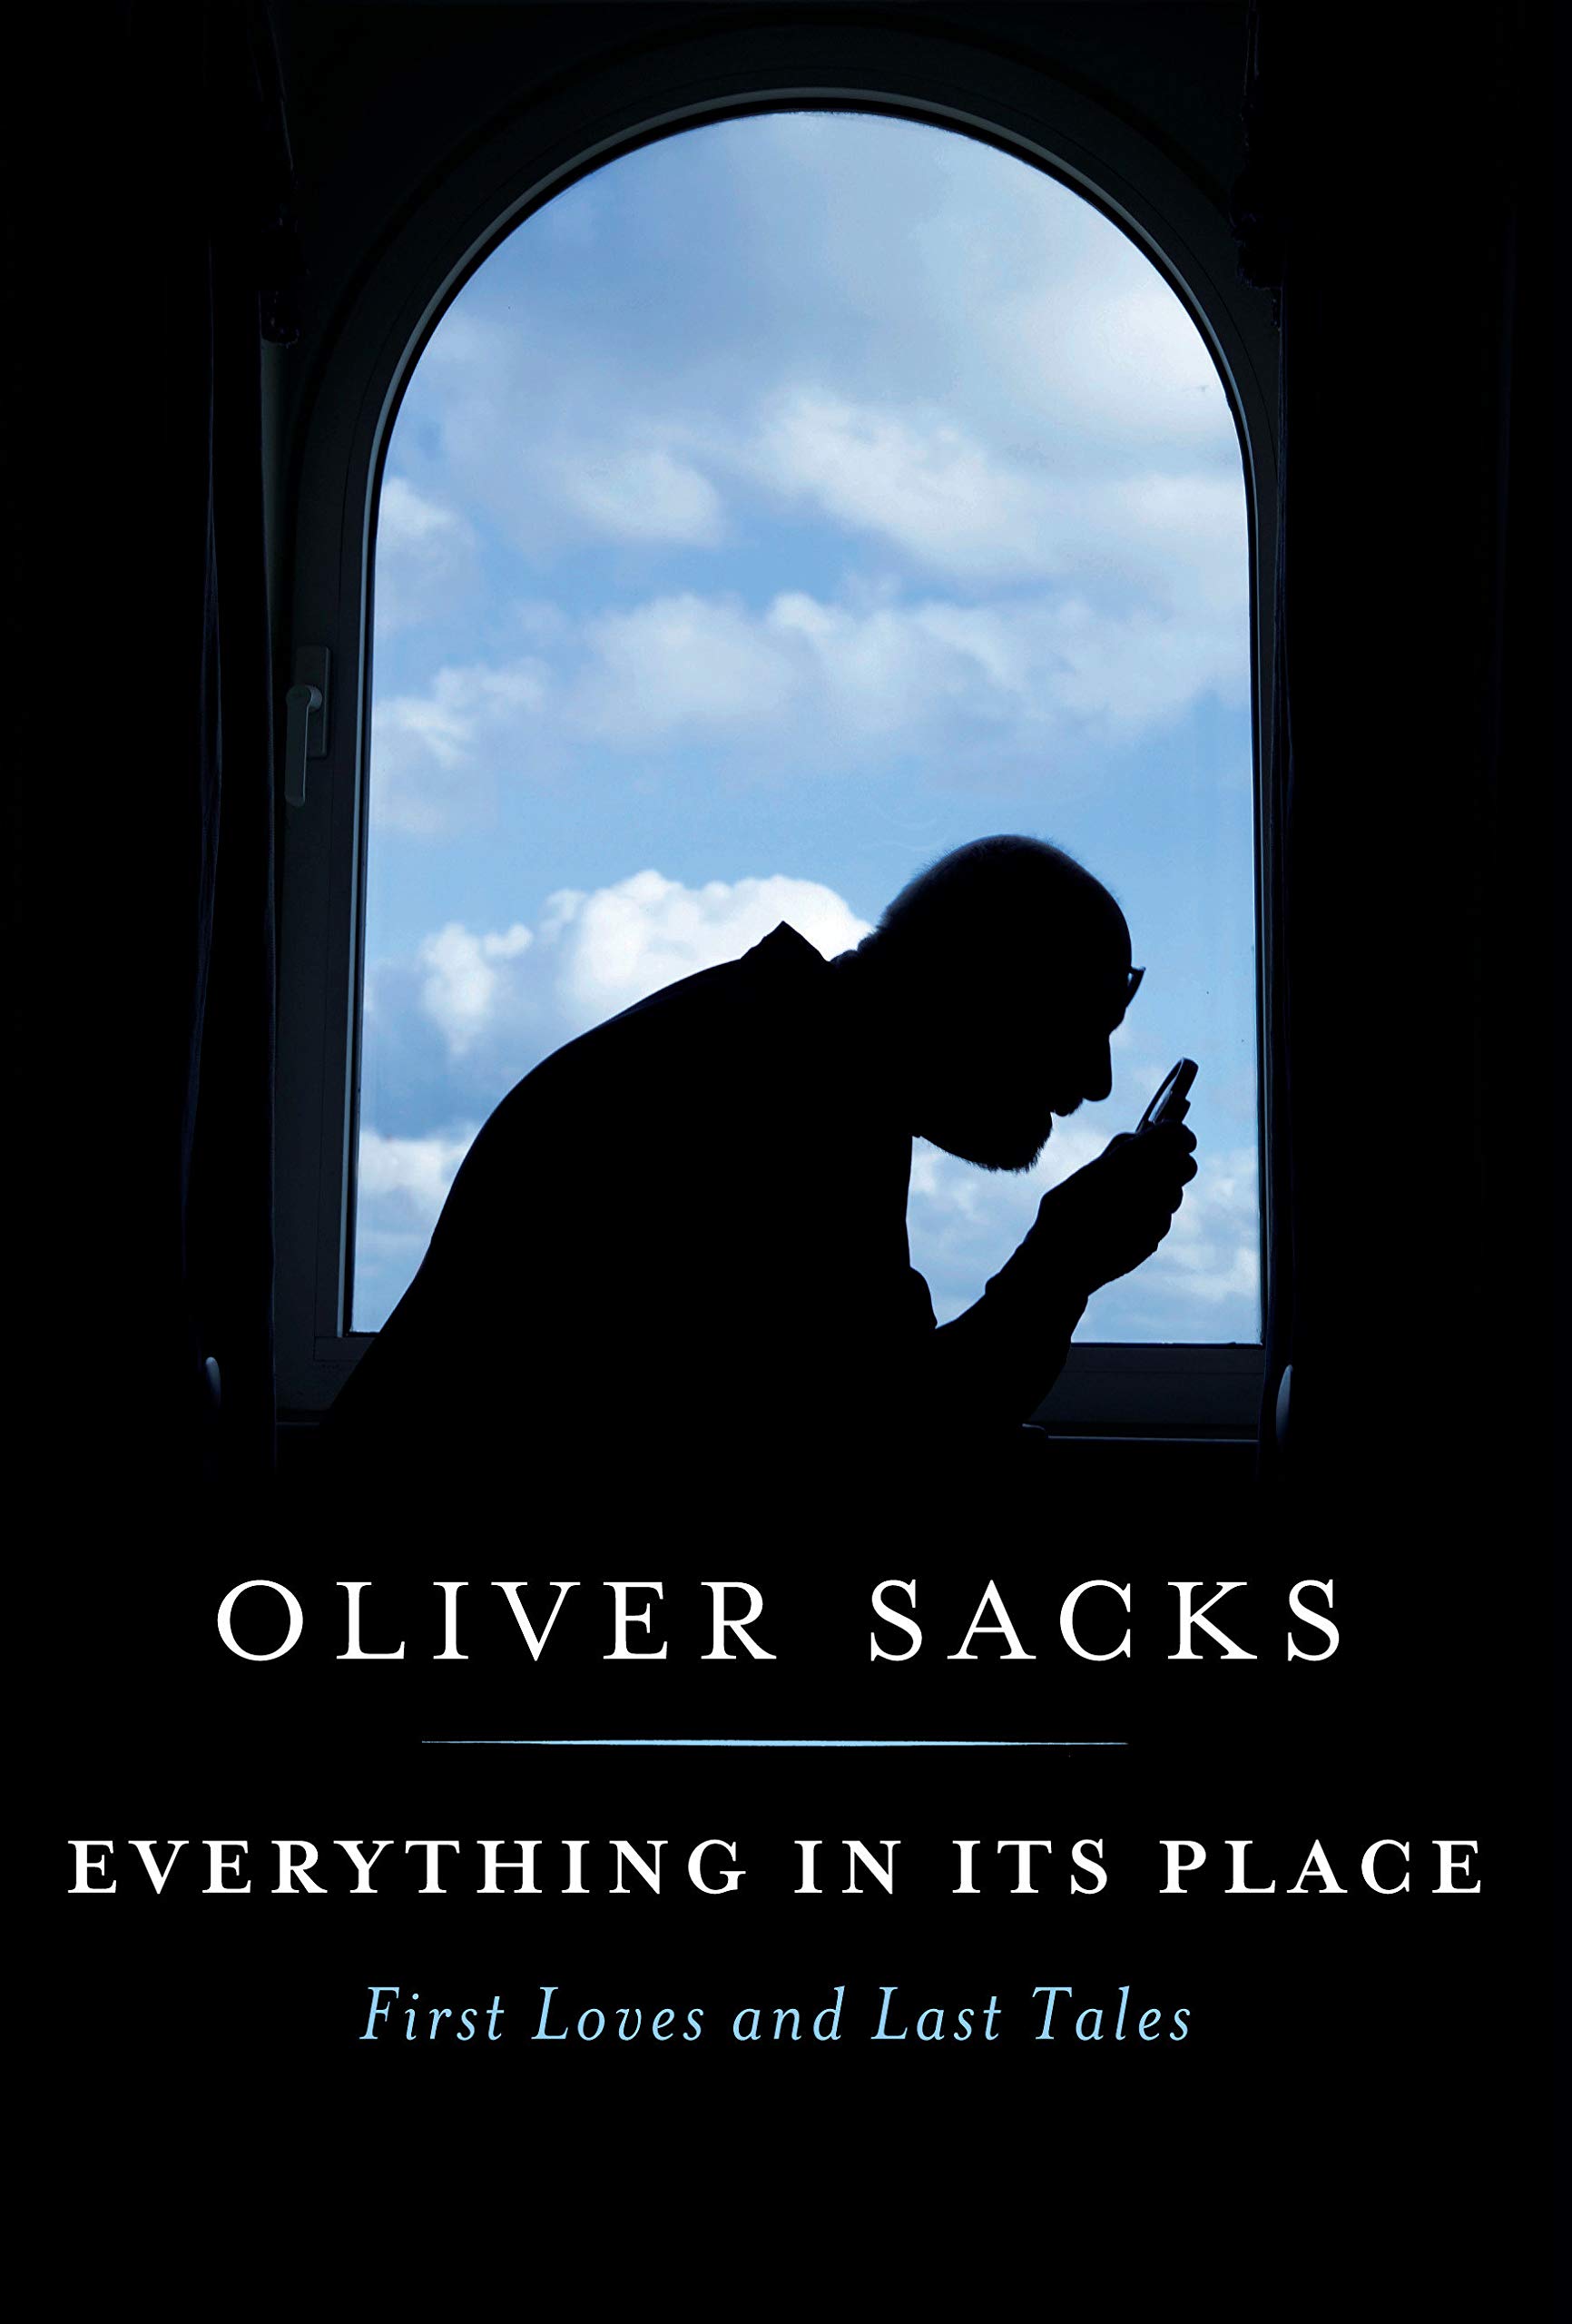 oliver sacks everything in its place